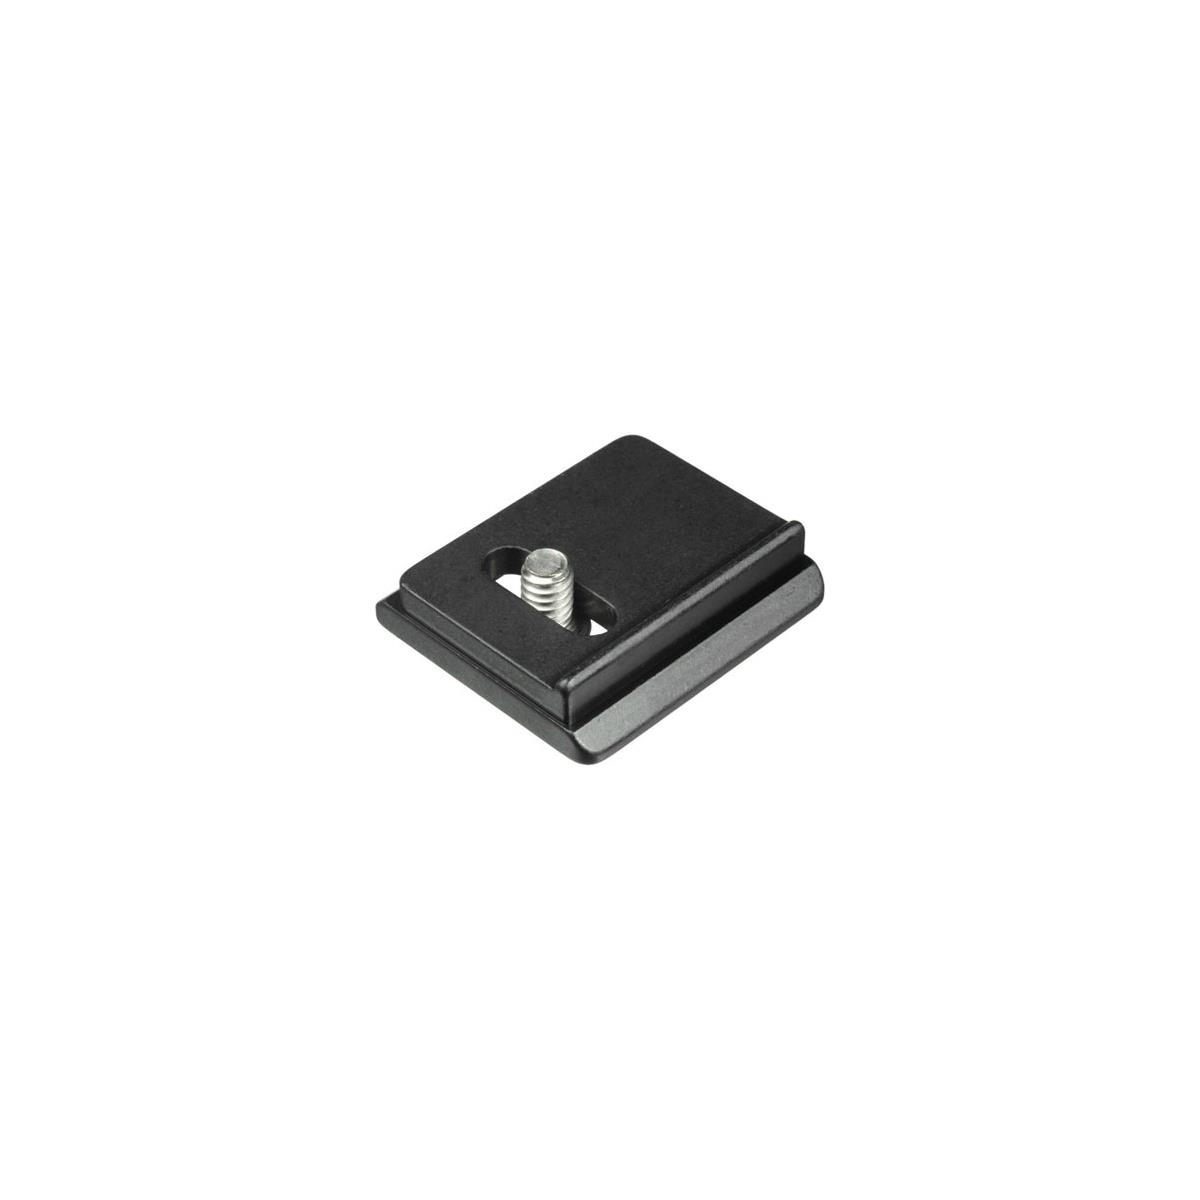 Image of Acratech Arca-Type Quick Release Plate for Olympus OMD E5 Camera